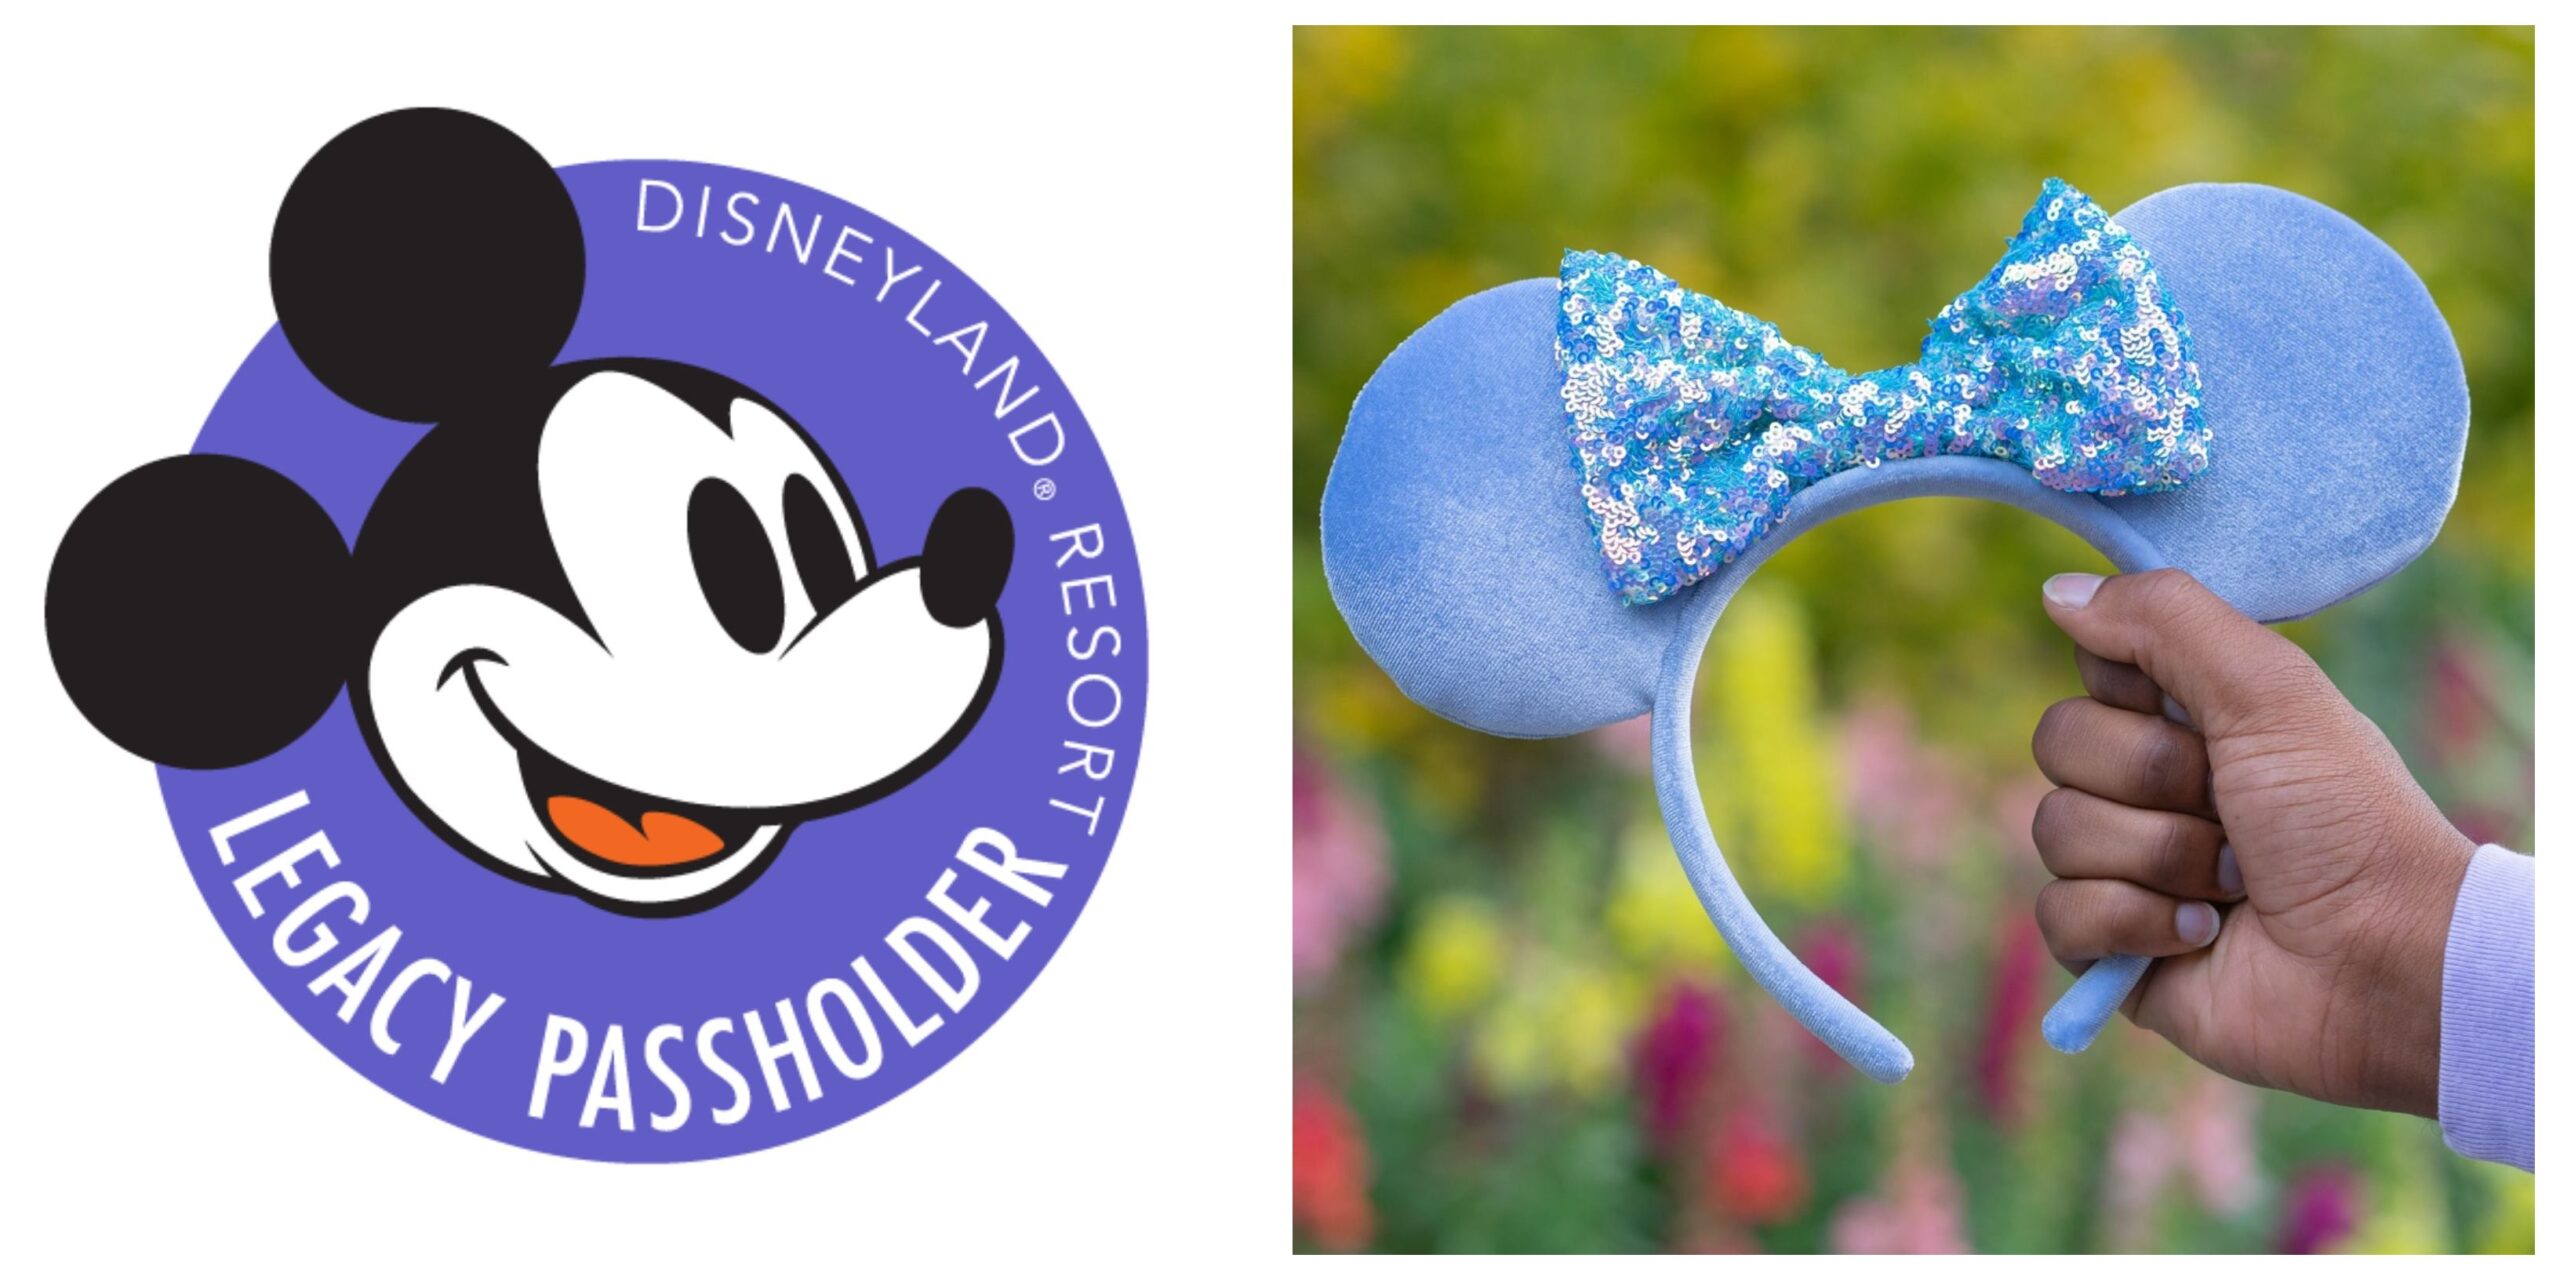 Disneyland Annual Passholder 30% off discount extended